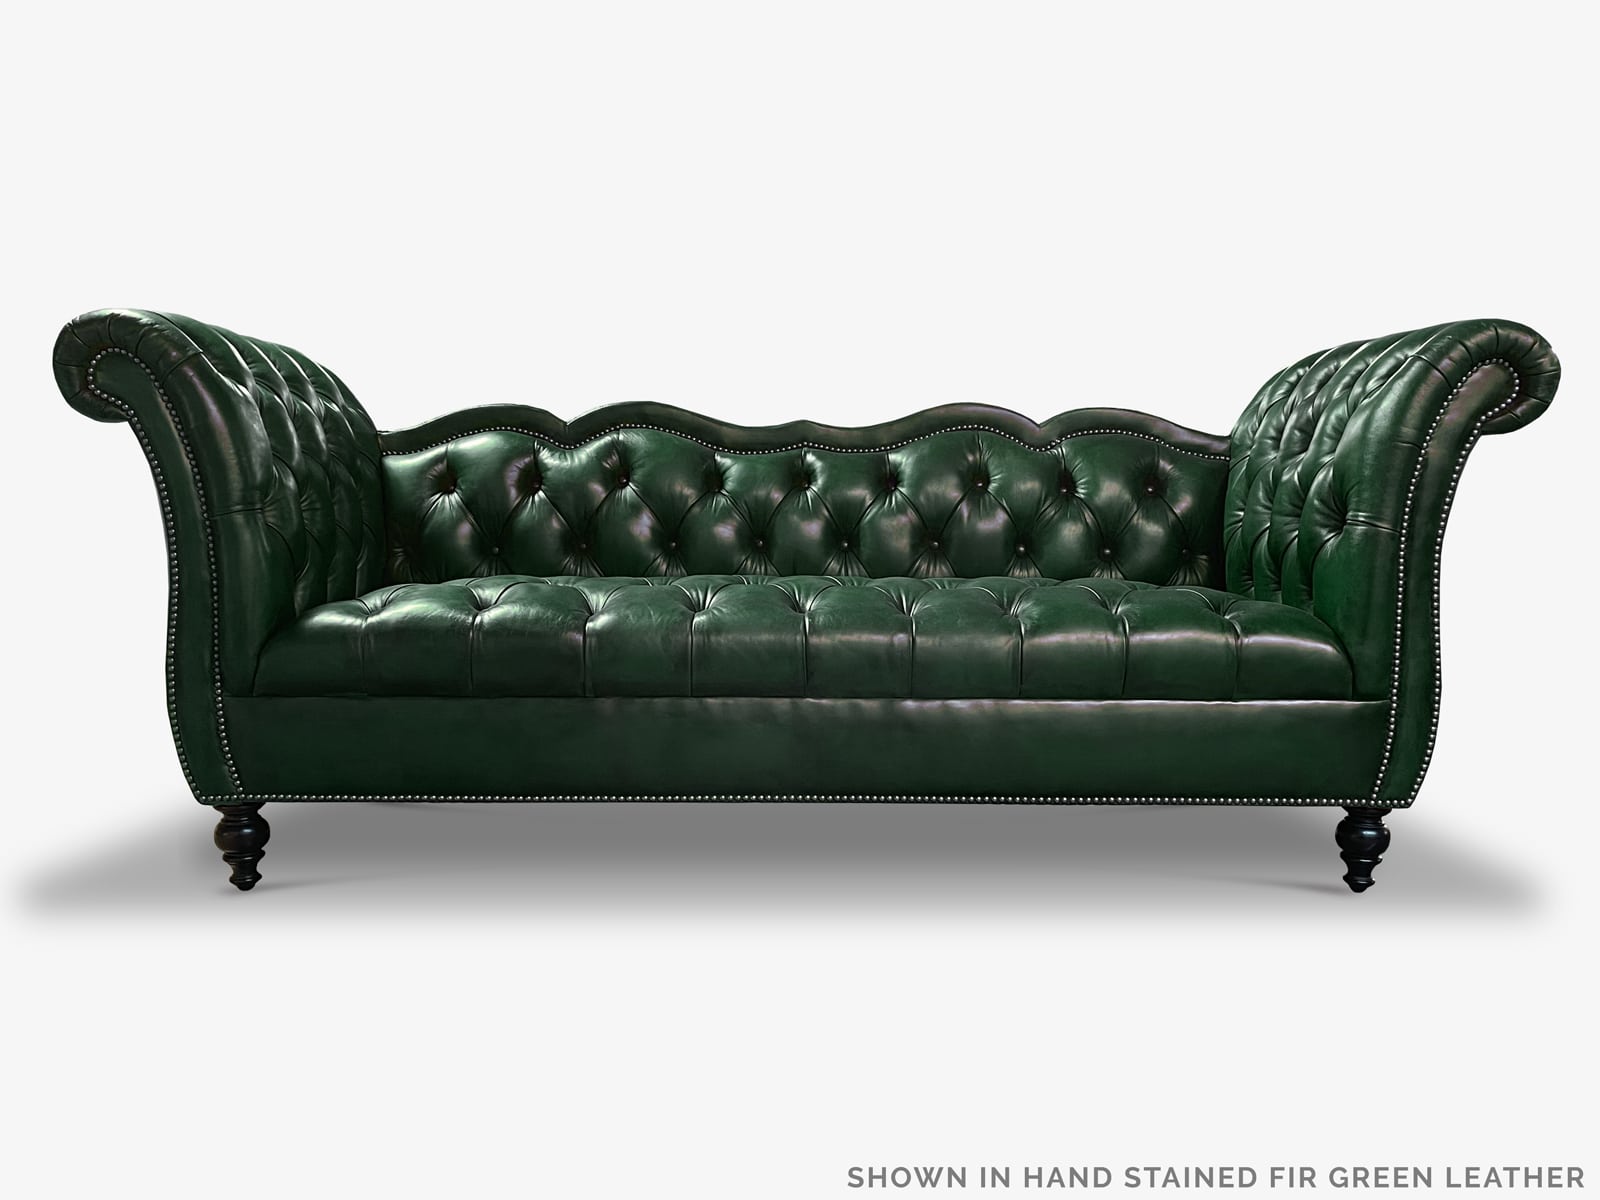 The Collins Custom Built Vintage Hand-Stained Fir Green Chesterfield Sofa